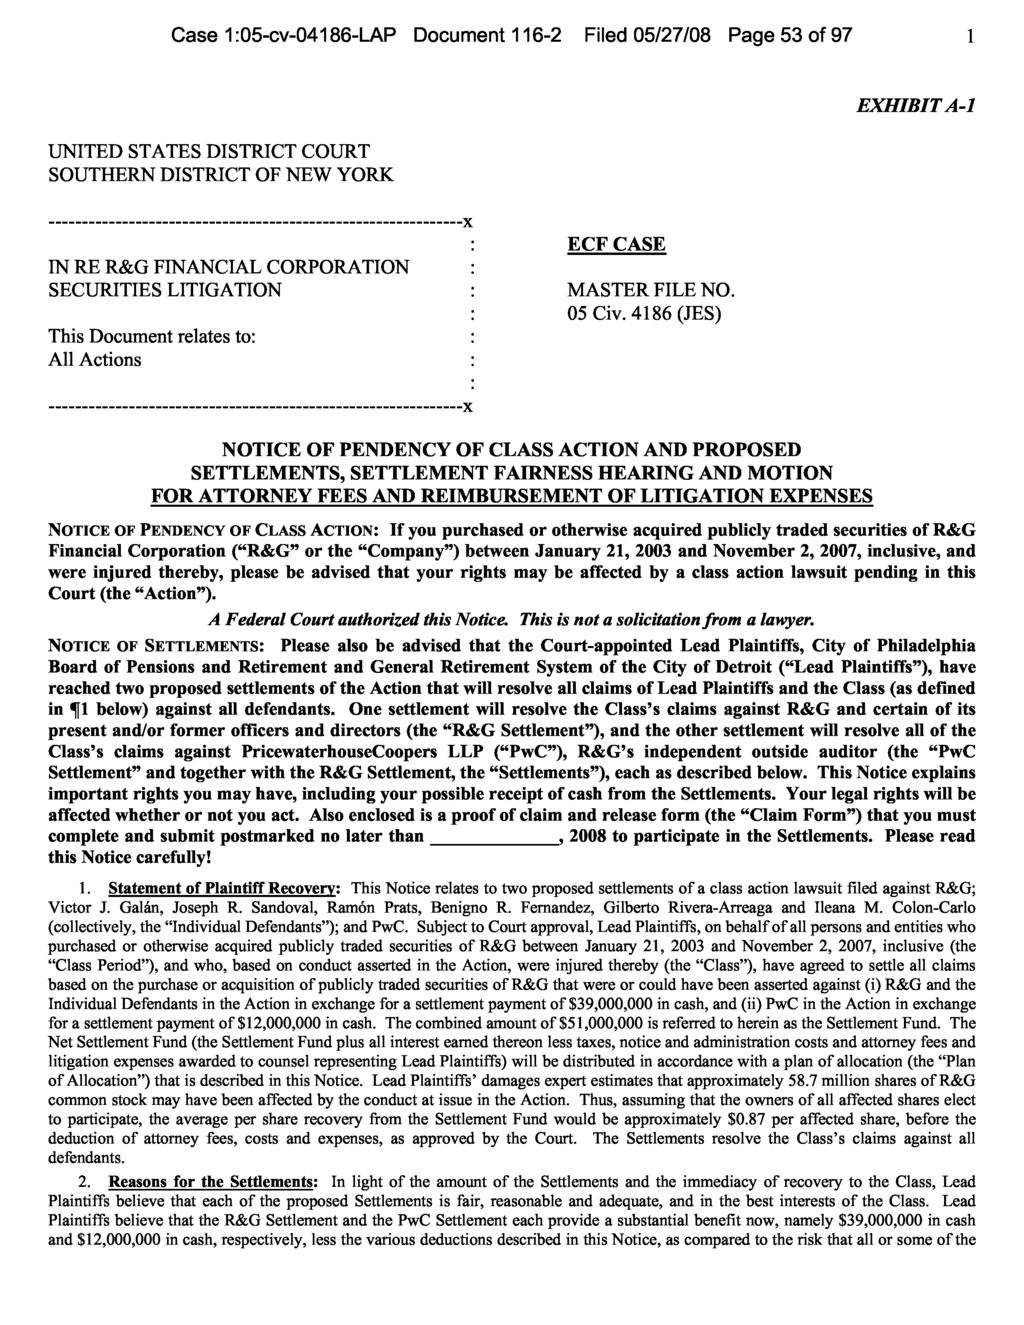 Case 1:05-cv-04186-LAP Document 116-2 Filed 05/27/08 Page 53 of 97 EXHIBIT A-1 UNITED STATES DISTRICT COURT SOUTHERN DISTRICT OF NEW YORK IN RE R&G FINANCIAL CORPORATION SECURITIES LITIGATION This